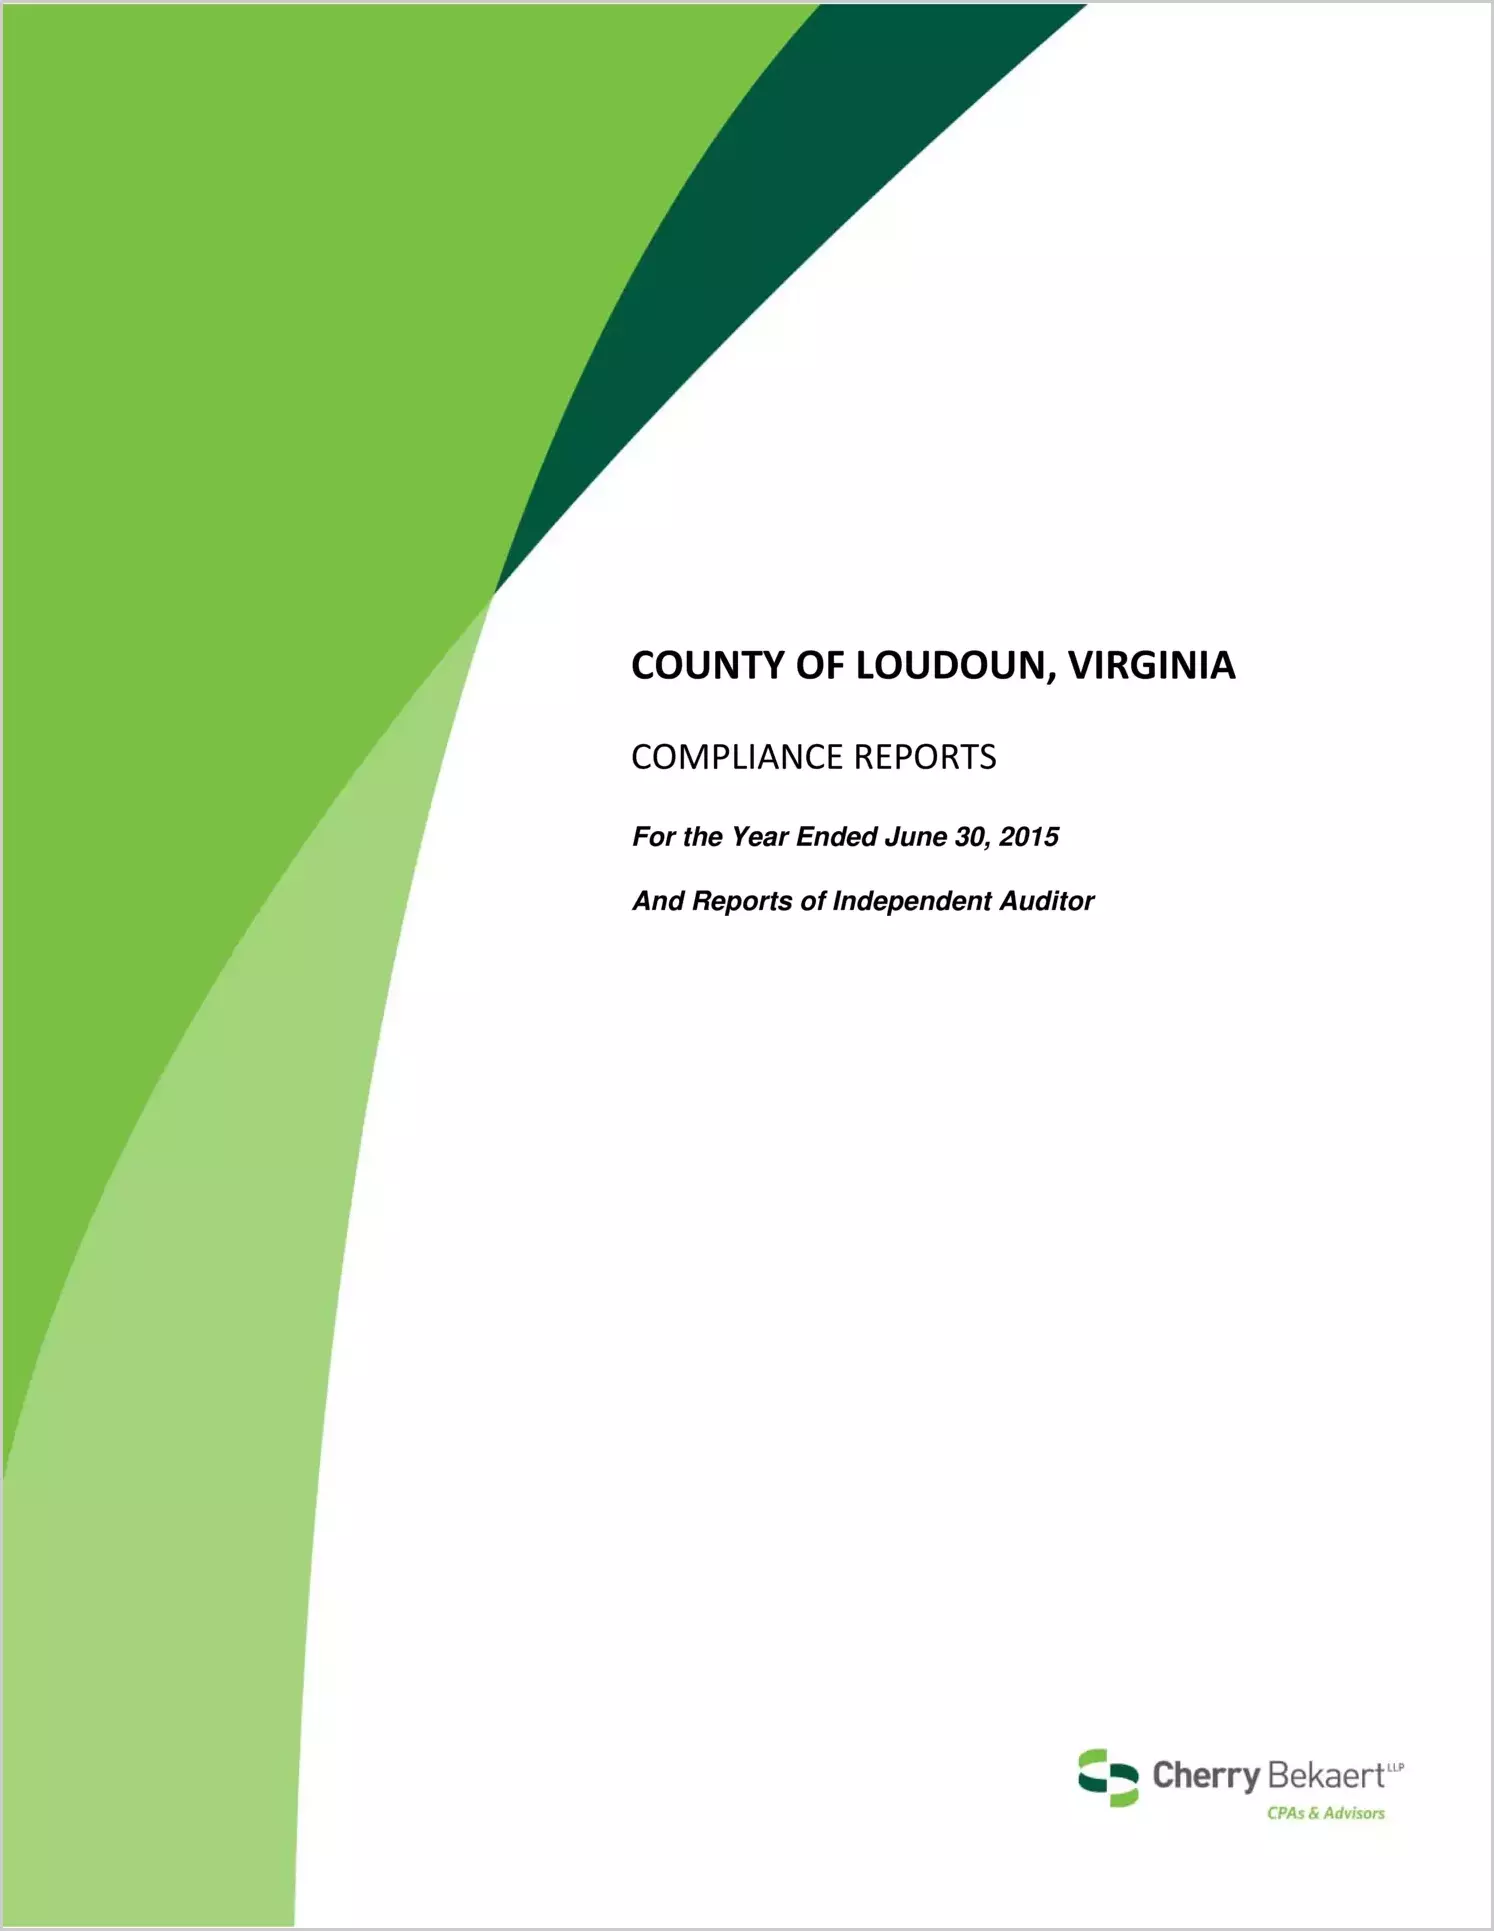 2015 Internal Control and Compliance Report for County of Loudoun